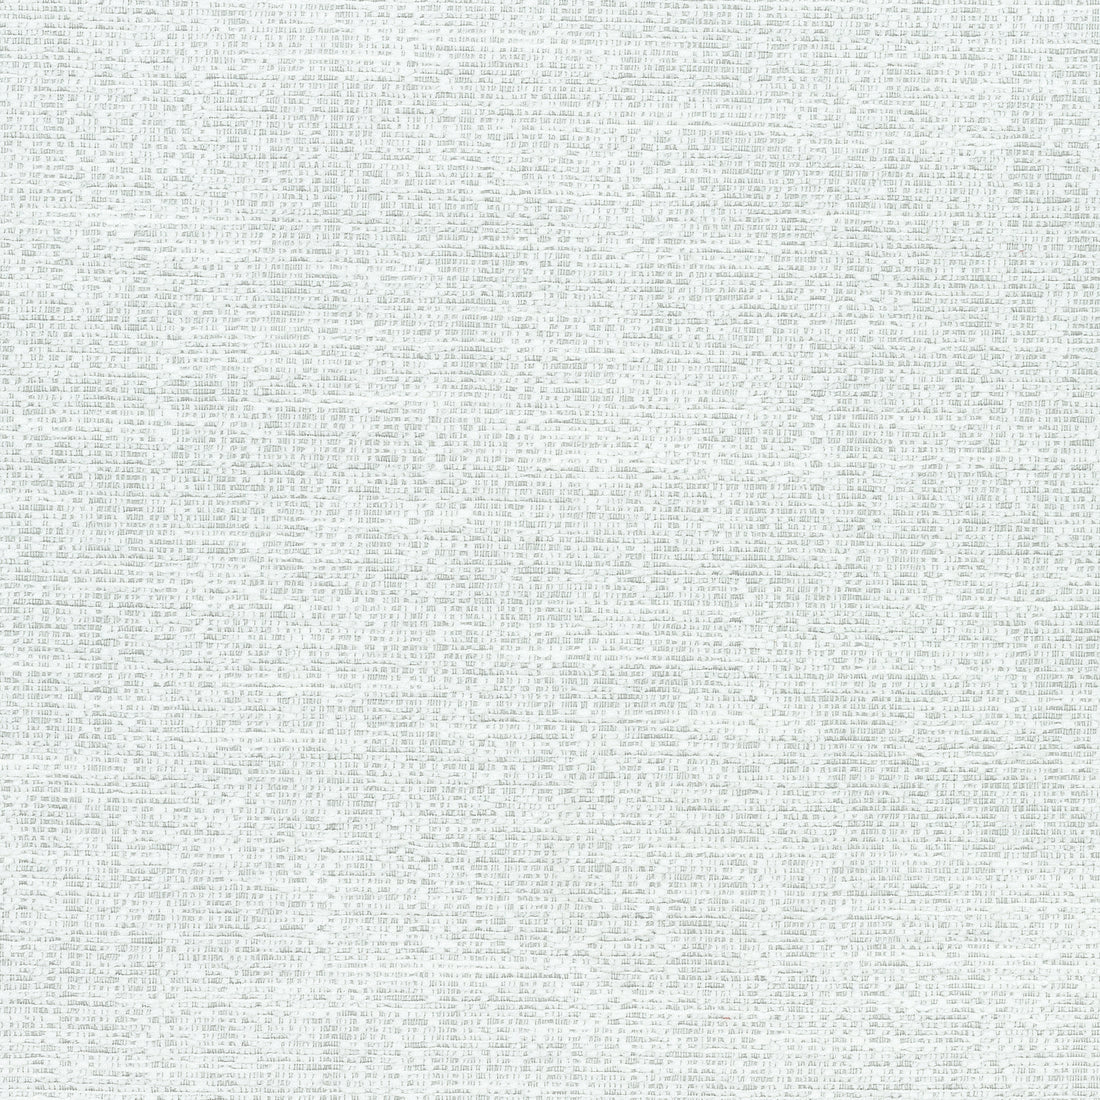 Freeport fabric in platinum color - pattern number W74616 - by Thibaut in the Festival collection